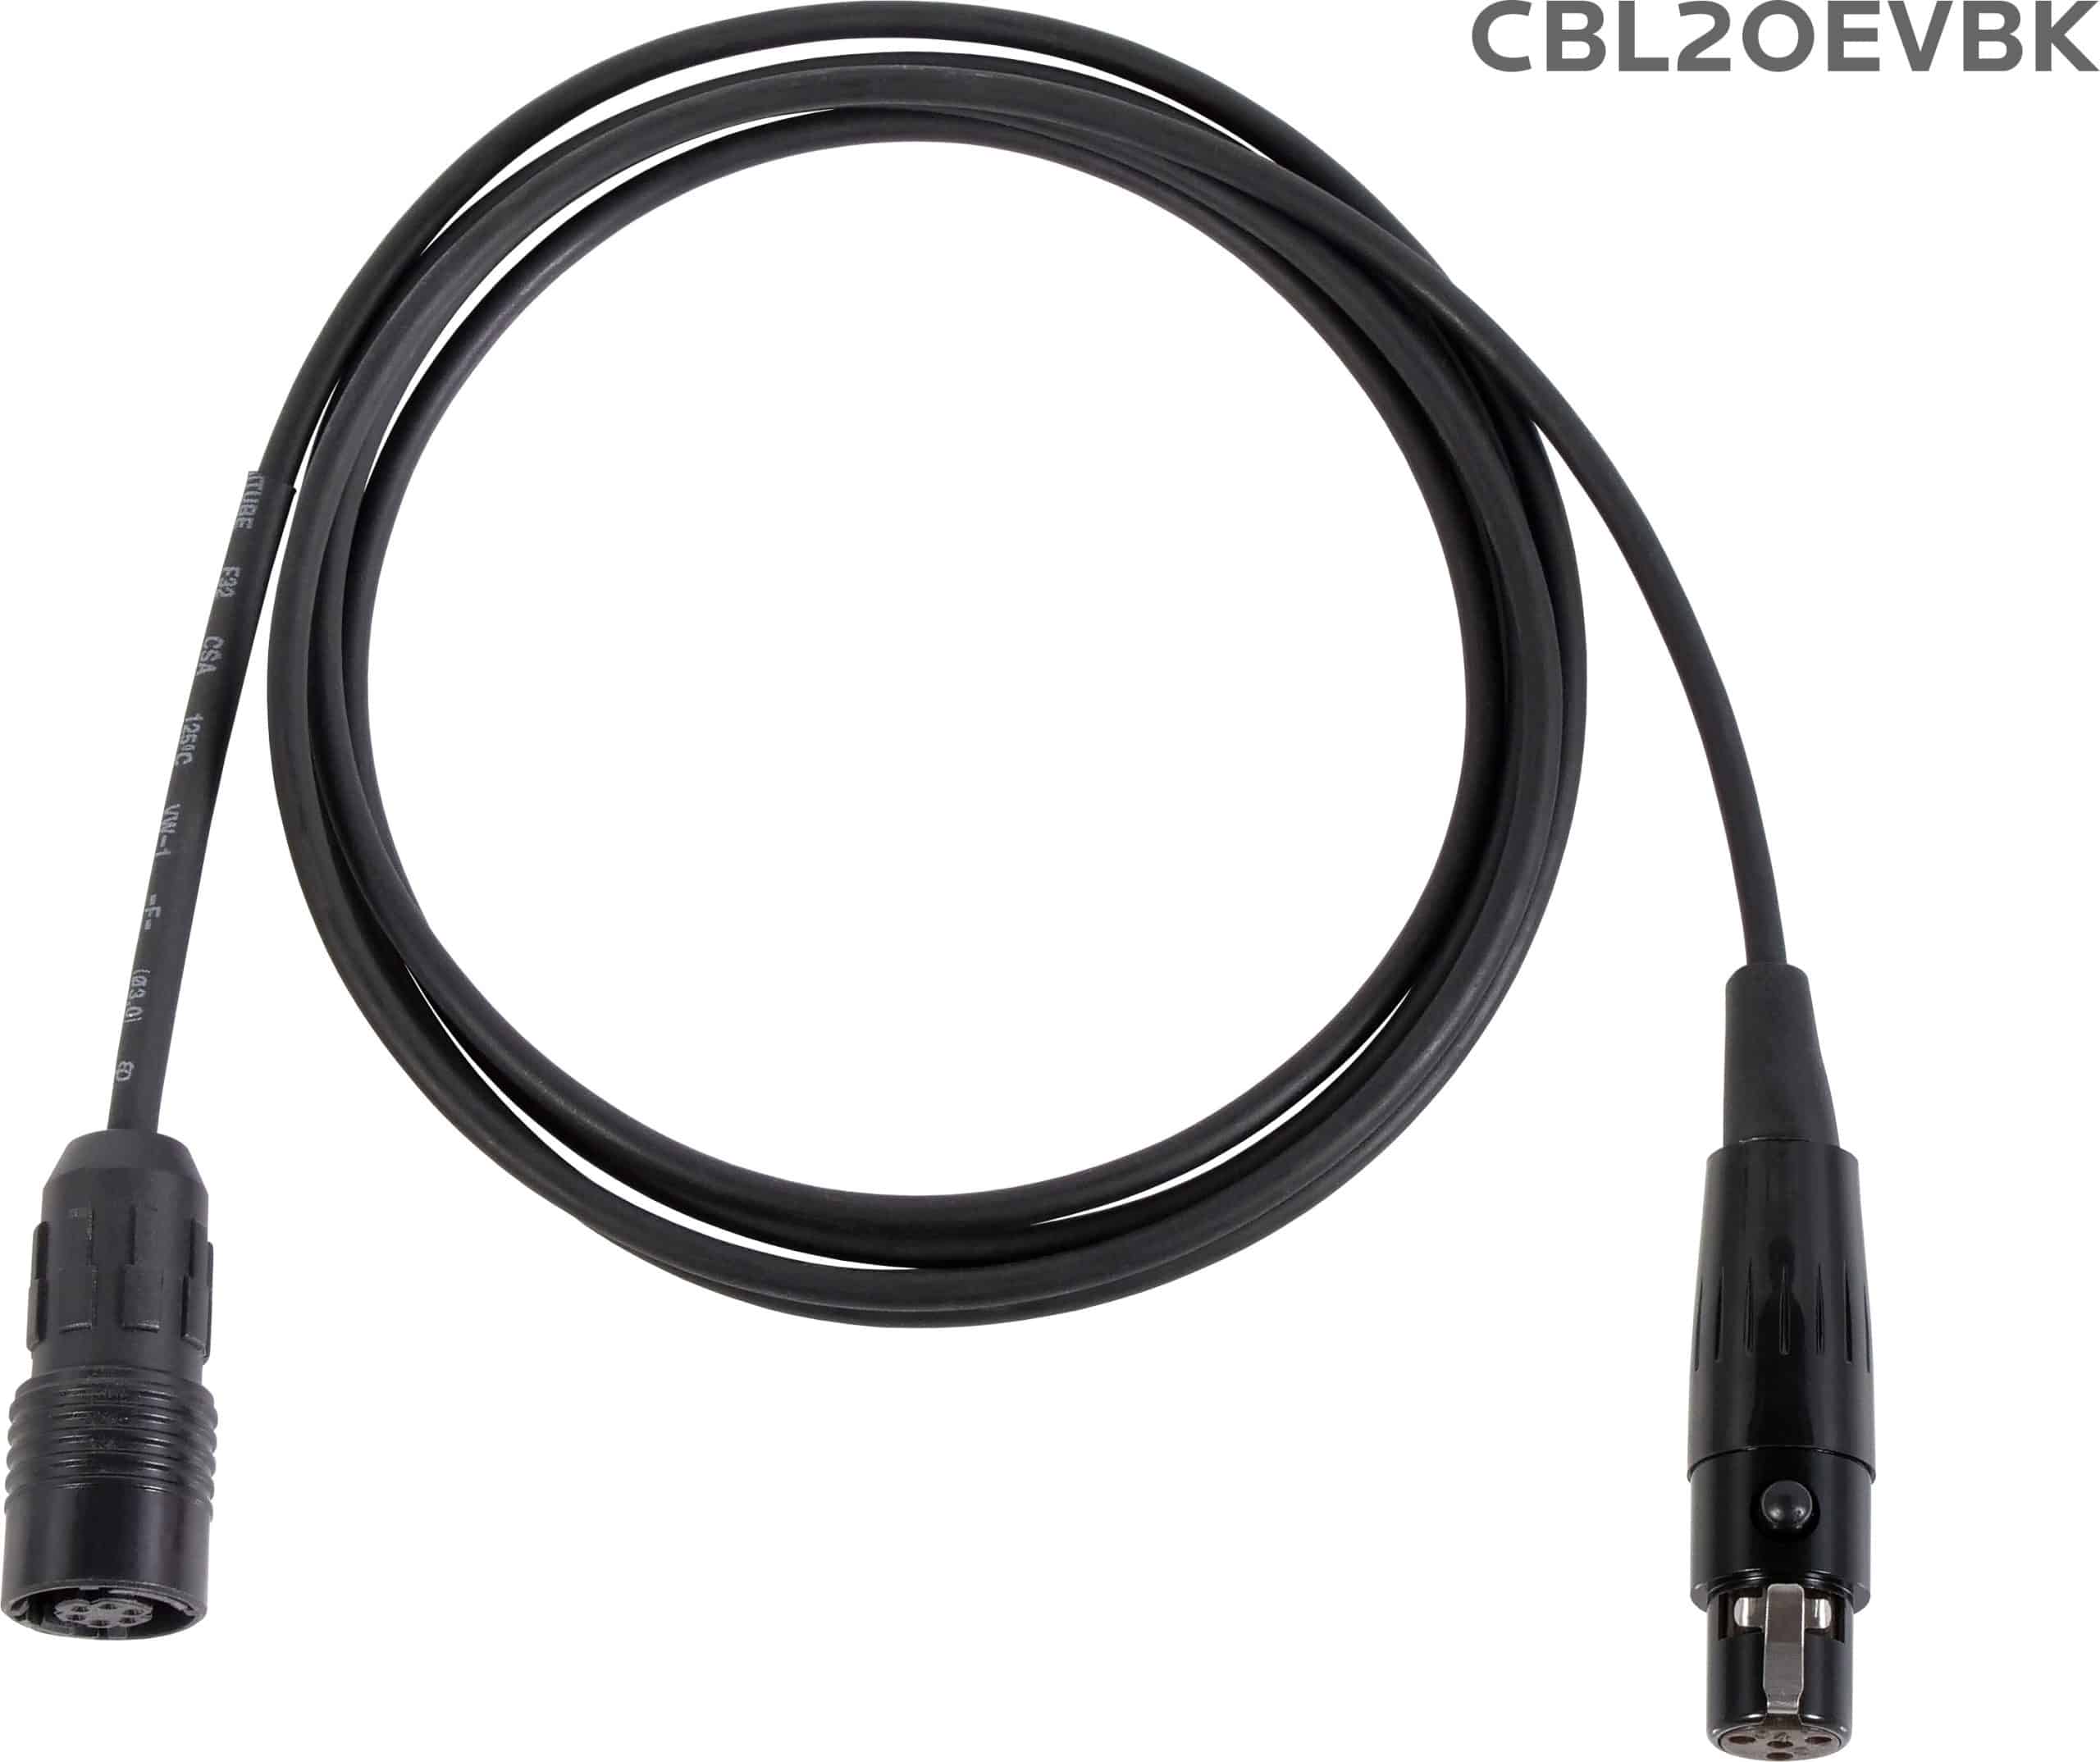 Replacement cable for H2O7 Wireless Headset Mic. The cable is wired to work with Electro-Voice® systems.